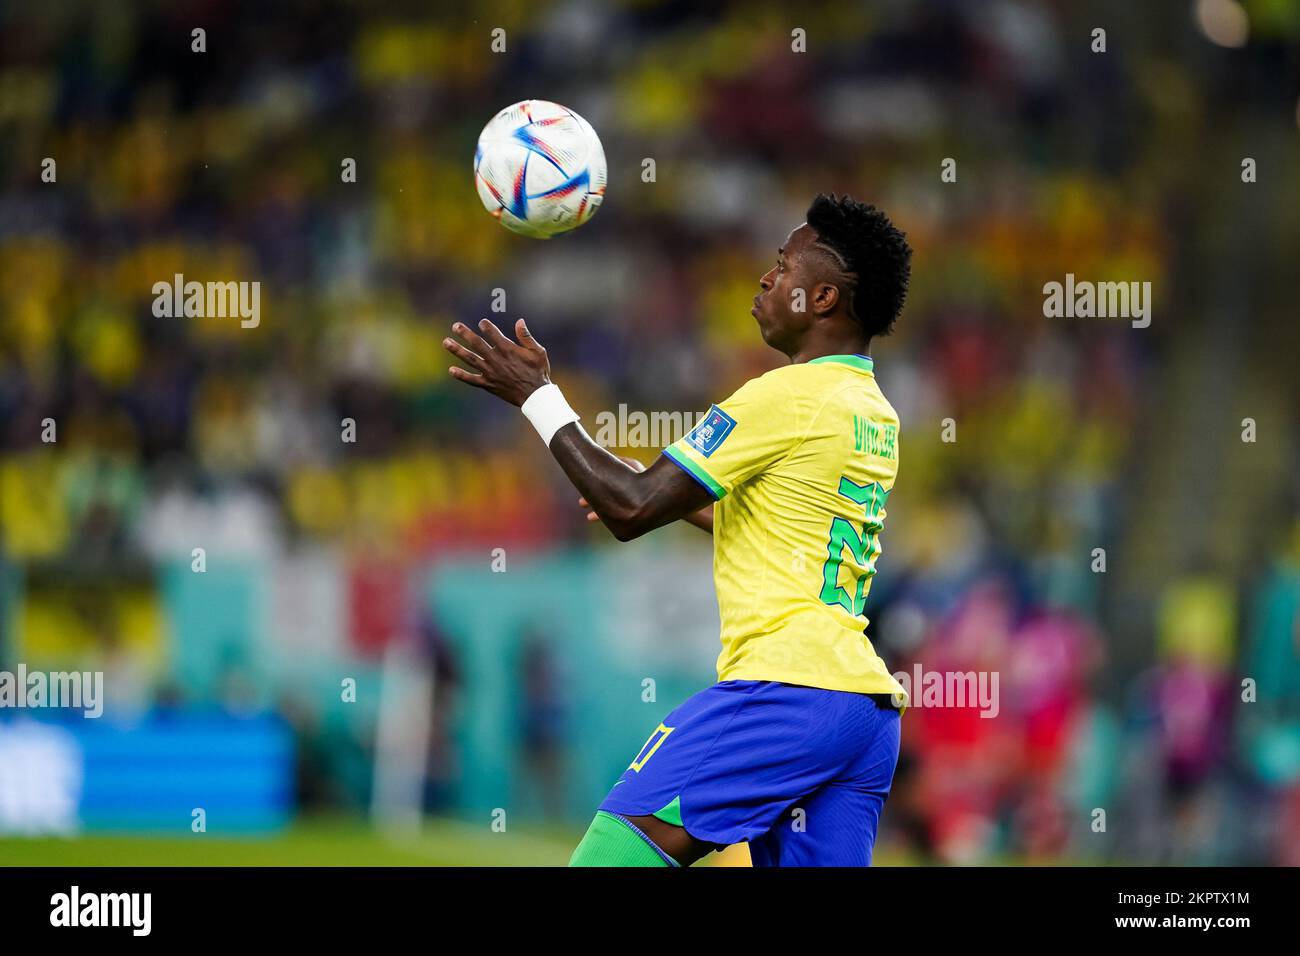 DOHA, QATAR - NOVEMBER 28: Player of Brazil Vinícius Júnior controls the ball during the FIFA World Cup Qatar 2022 group G match between Brazil and Switzerland at Stadium 974 on November 28, 2022 in Doha, Qatar. (Photo by Florencia Tan Jun/PxImages) Stock Photo